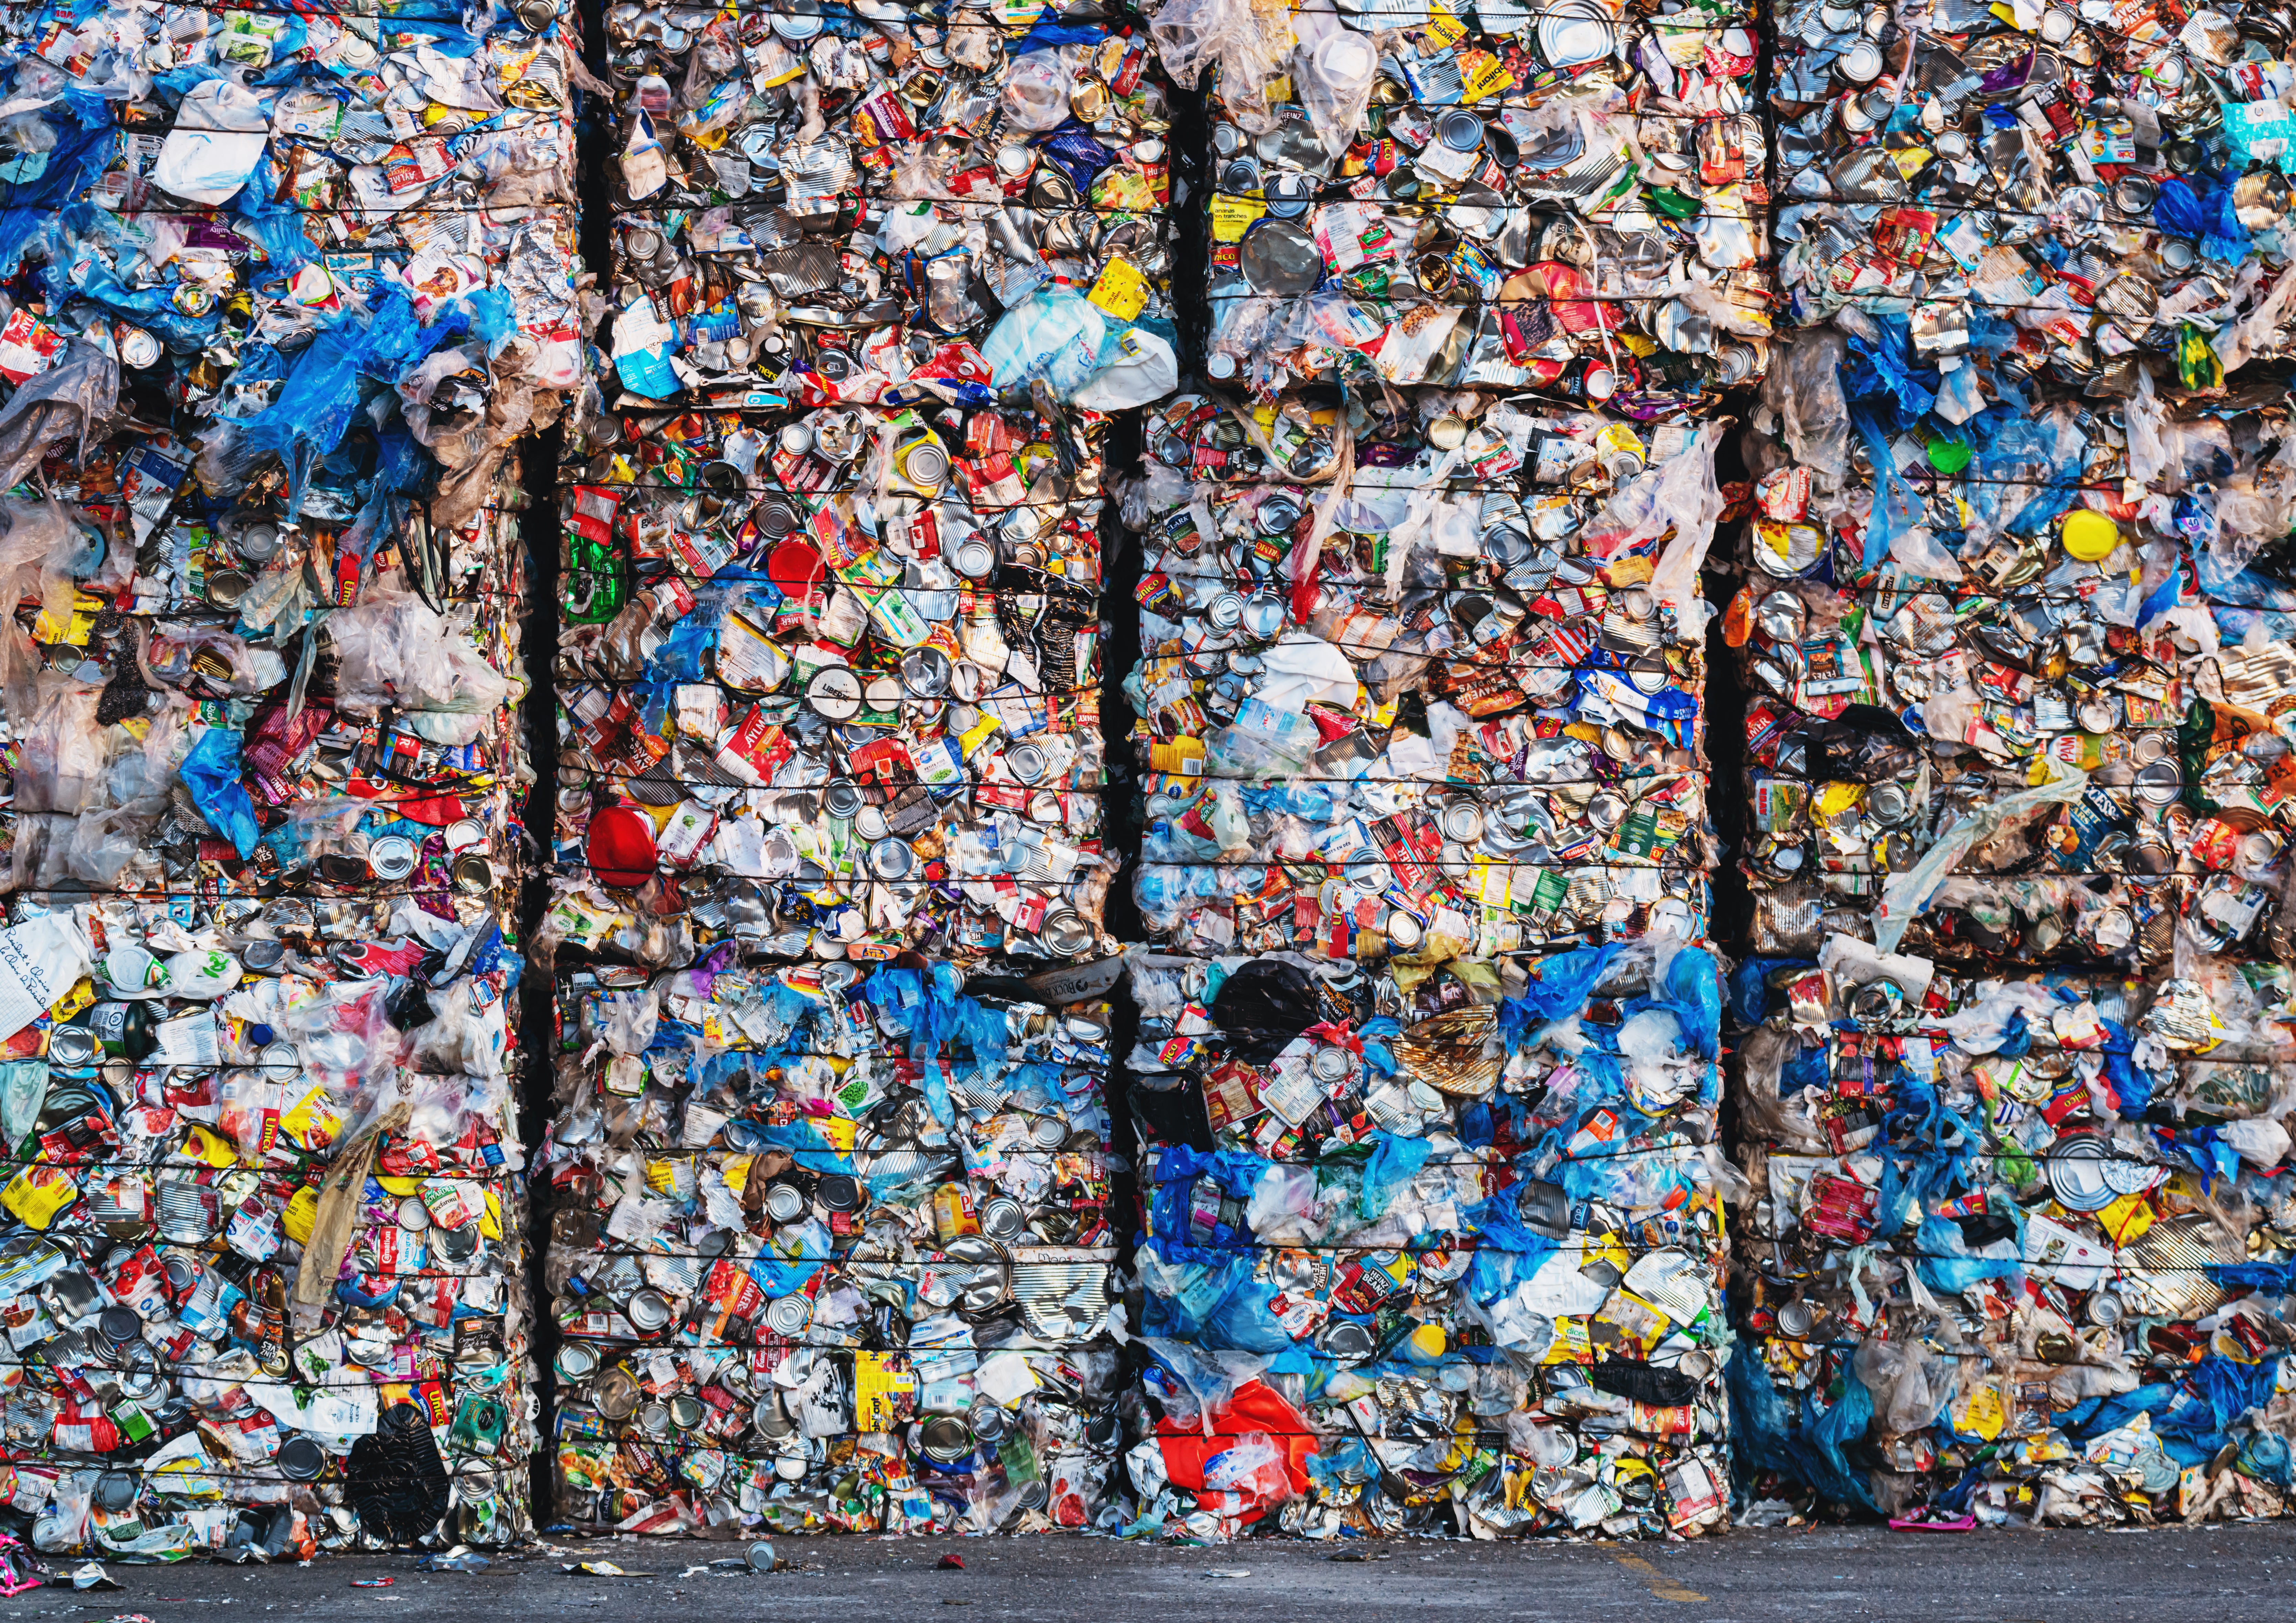 Two-fifths of people feel overwhelmed by the topic of recycling